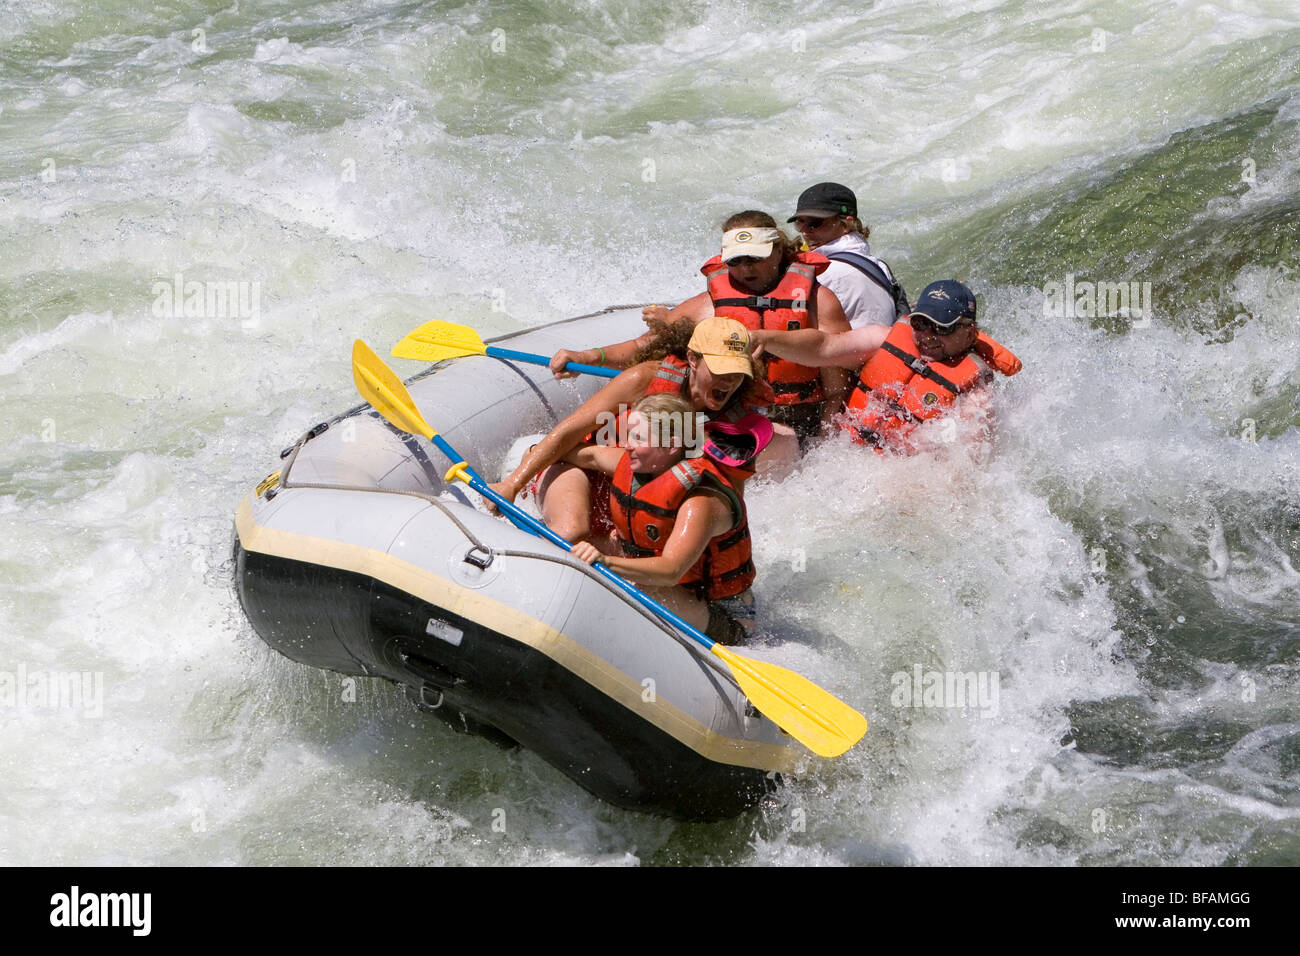 Whitewater rafting the main Payette River in southwestern Idaho, USA. Stock Photo